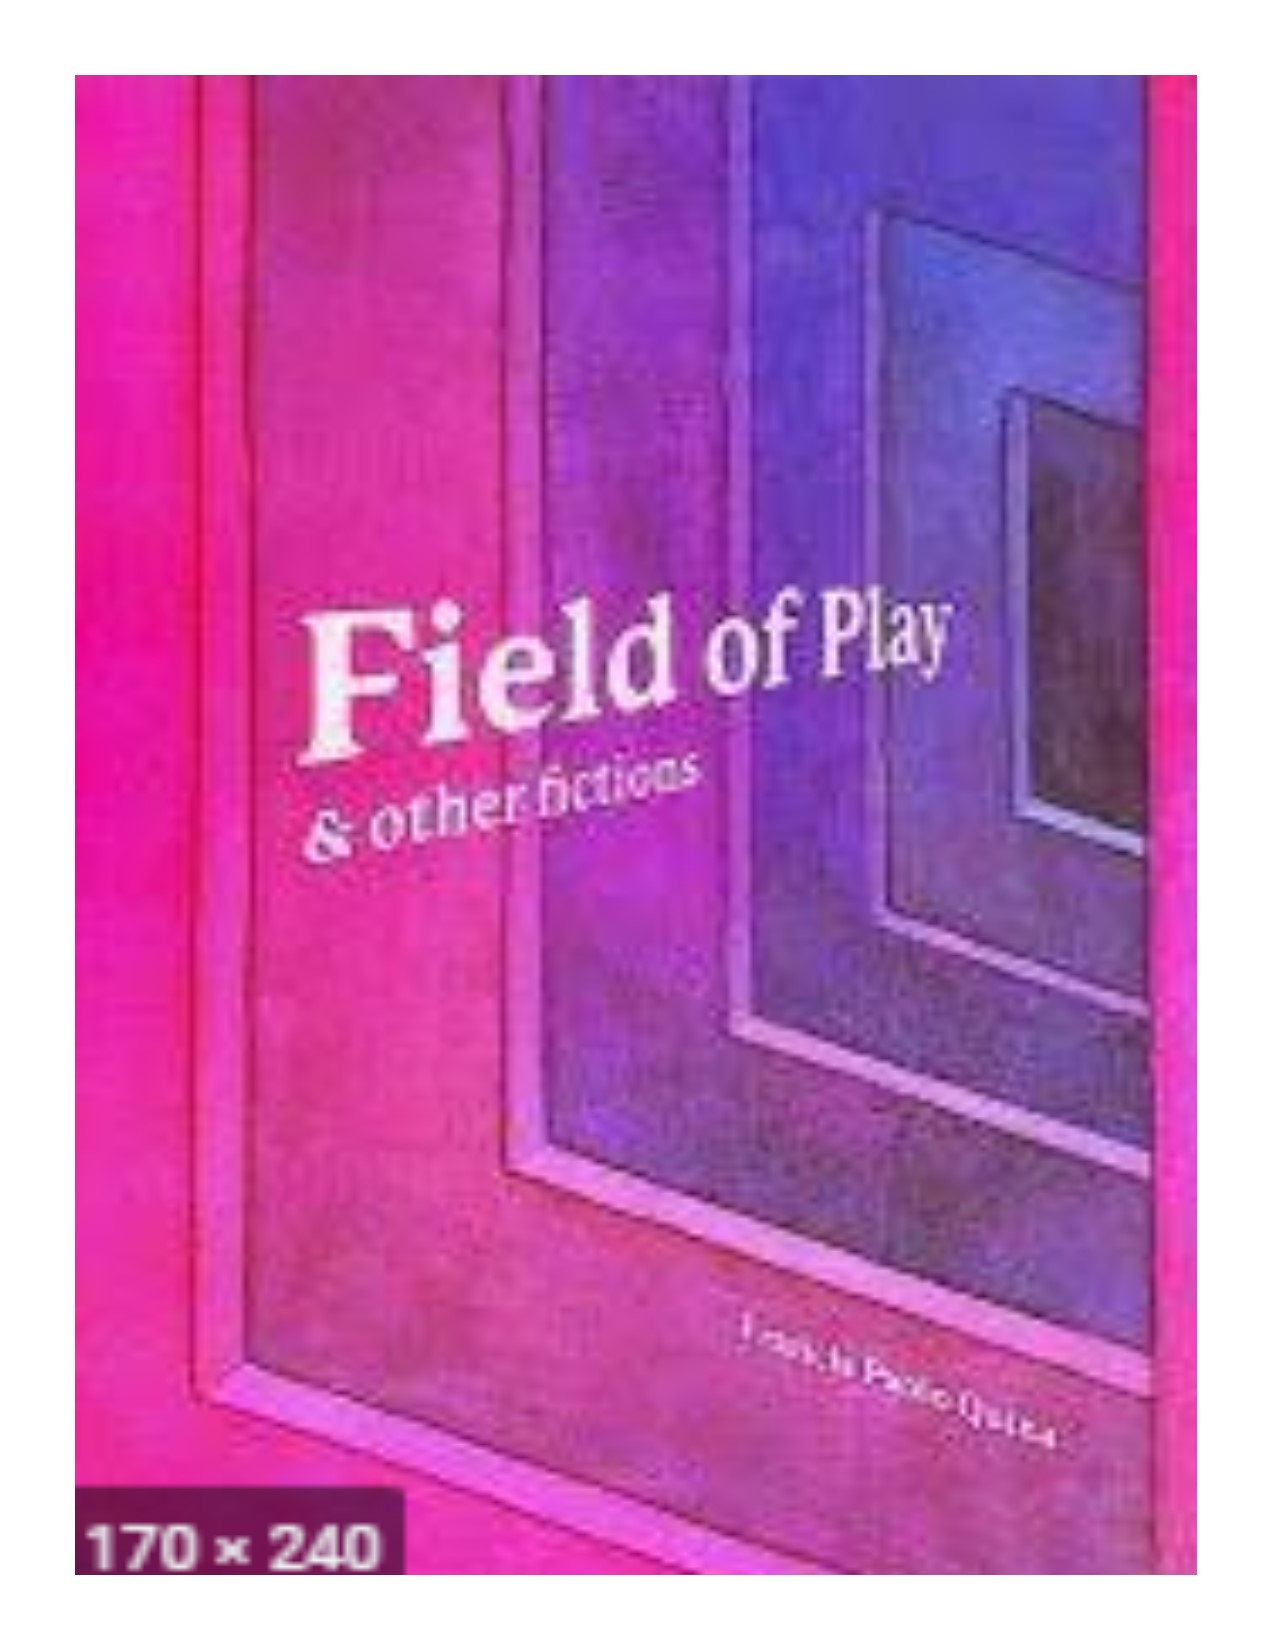 Field of play & other fictions